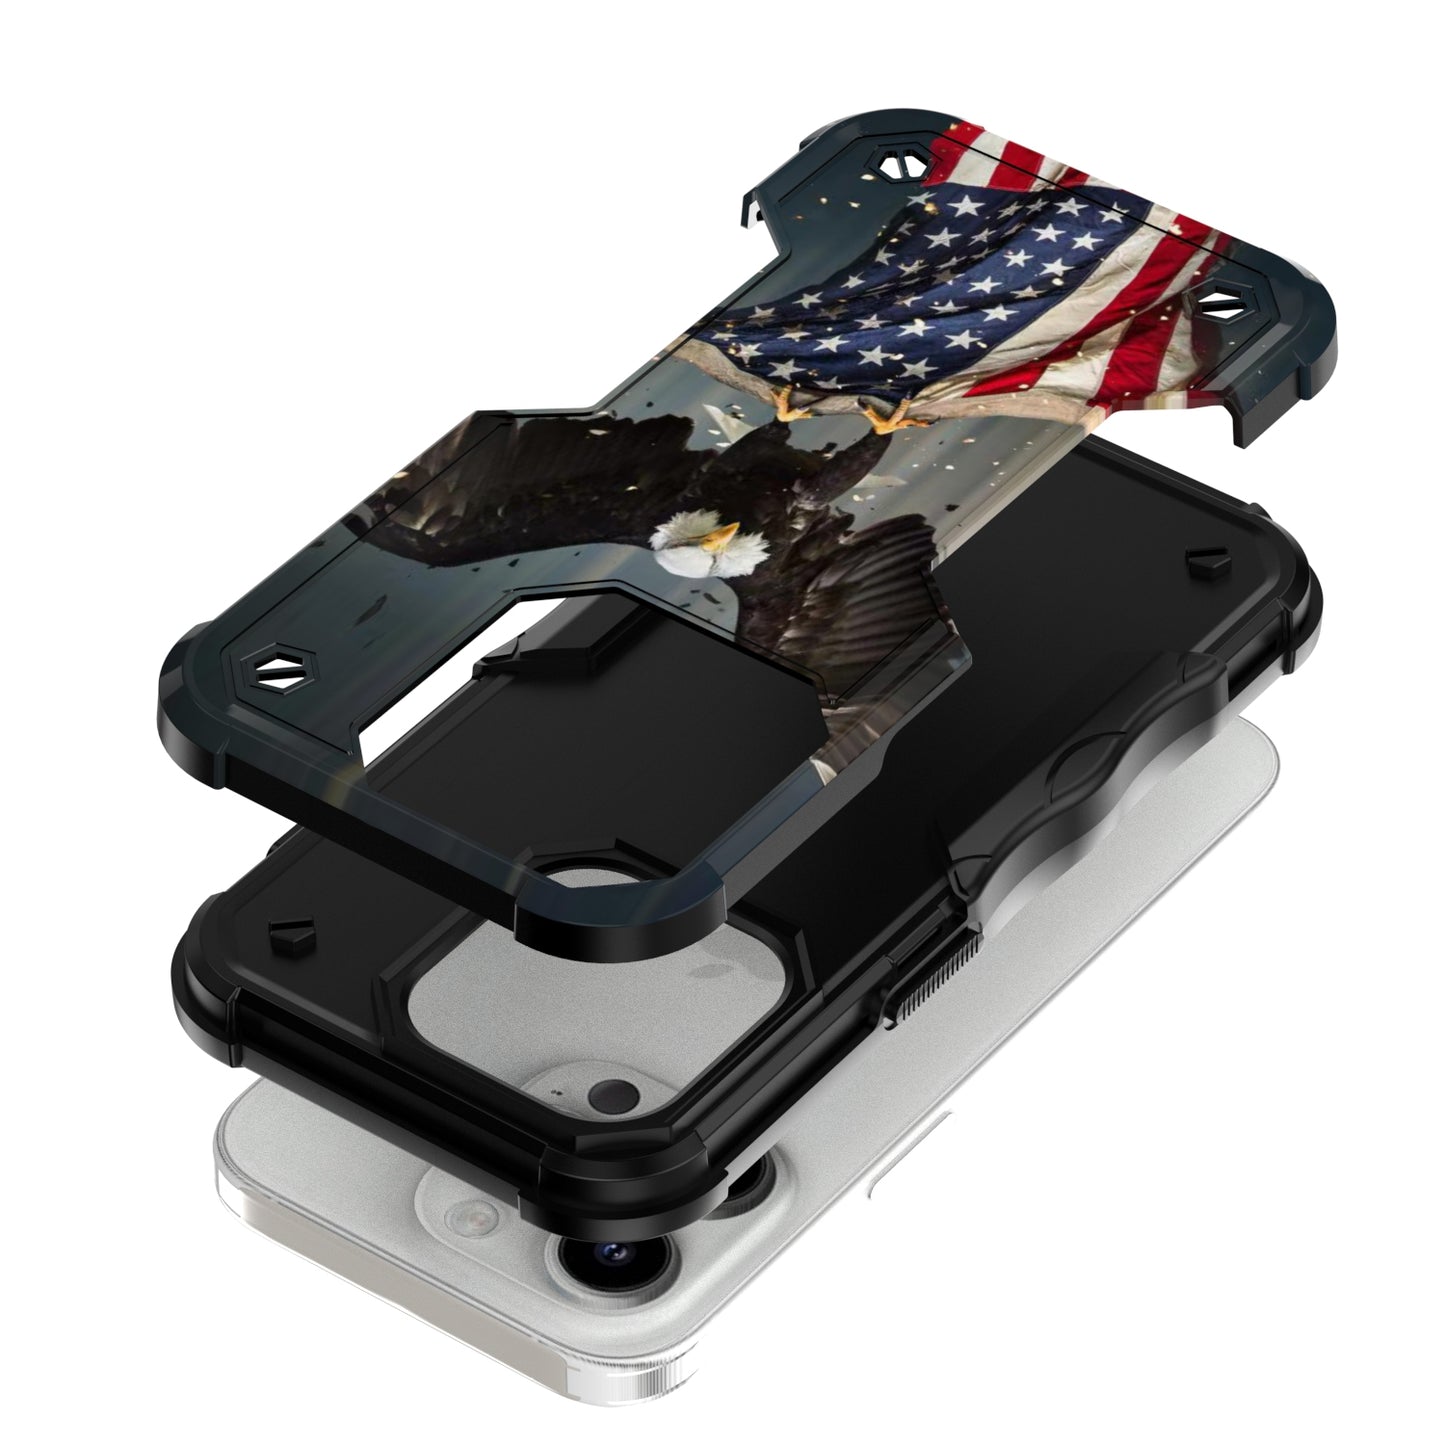 Case For Apple iPhone 15 Pro - Hybrid Grip Design Shockproof Phone Cover - American Bald Eagle Flying with Flag